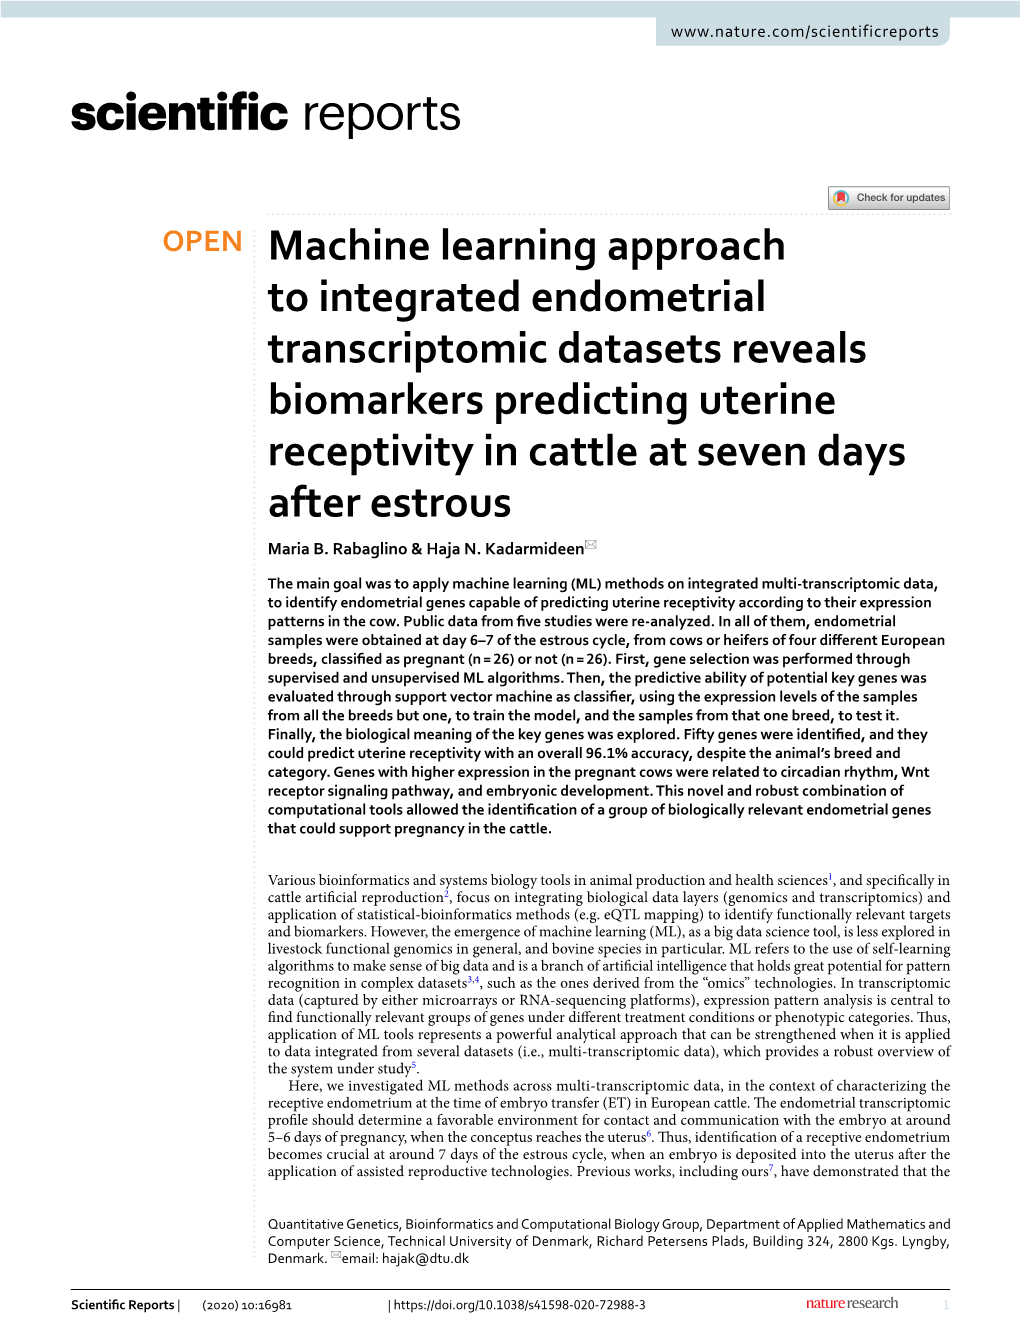 Machine Learning Approach to Integrated Endometrial